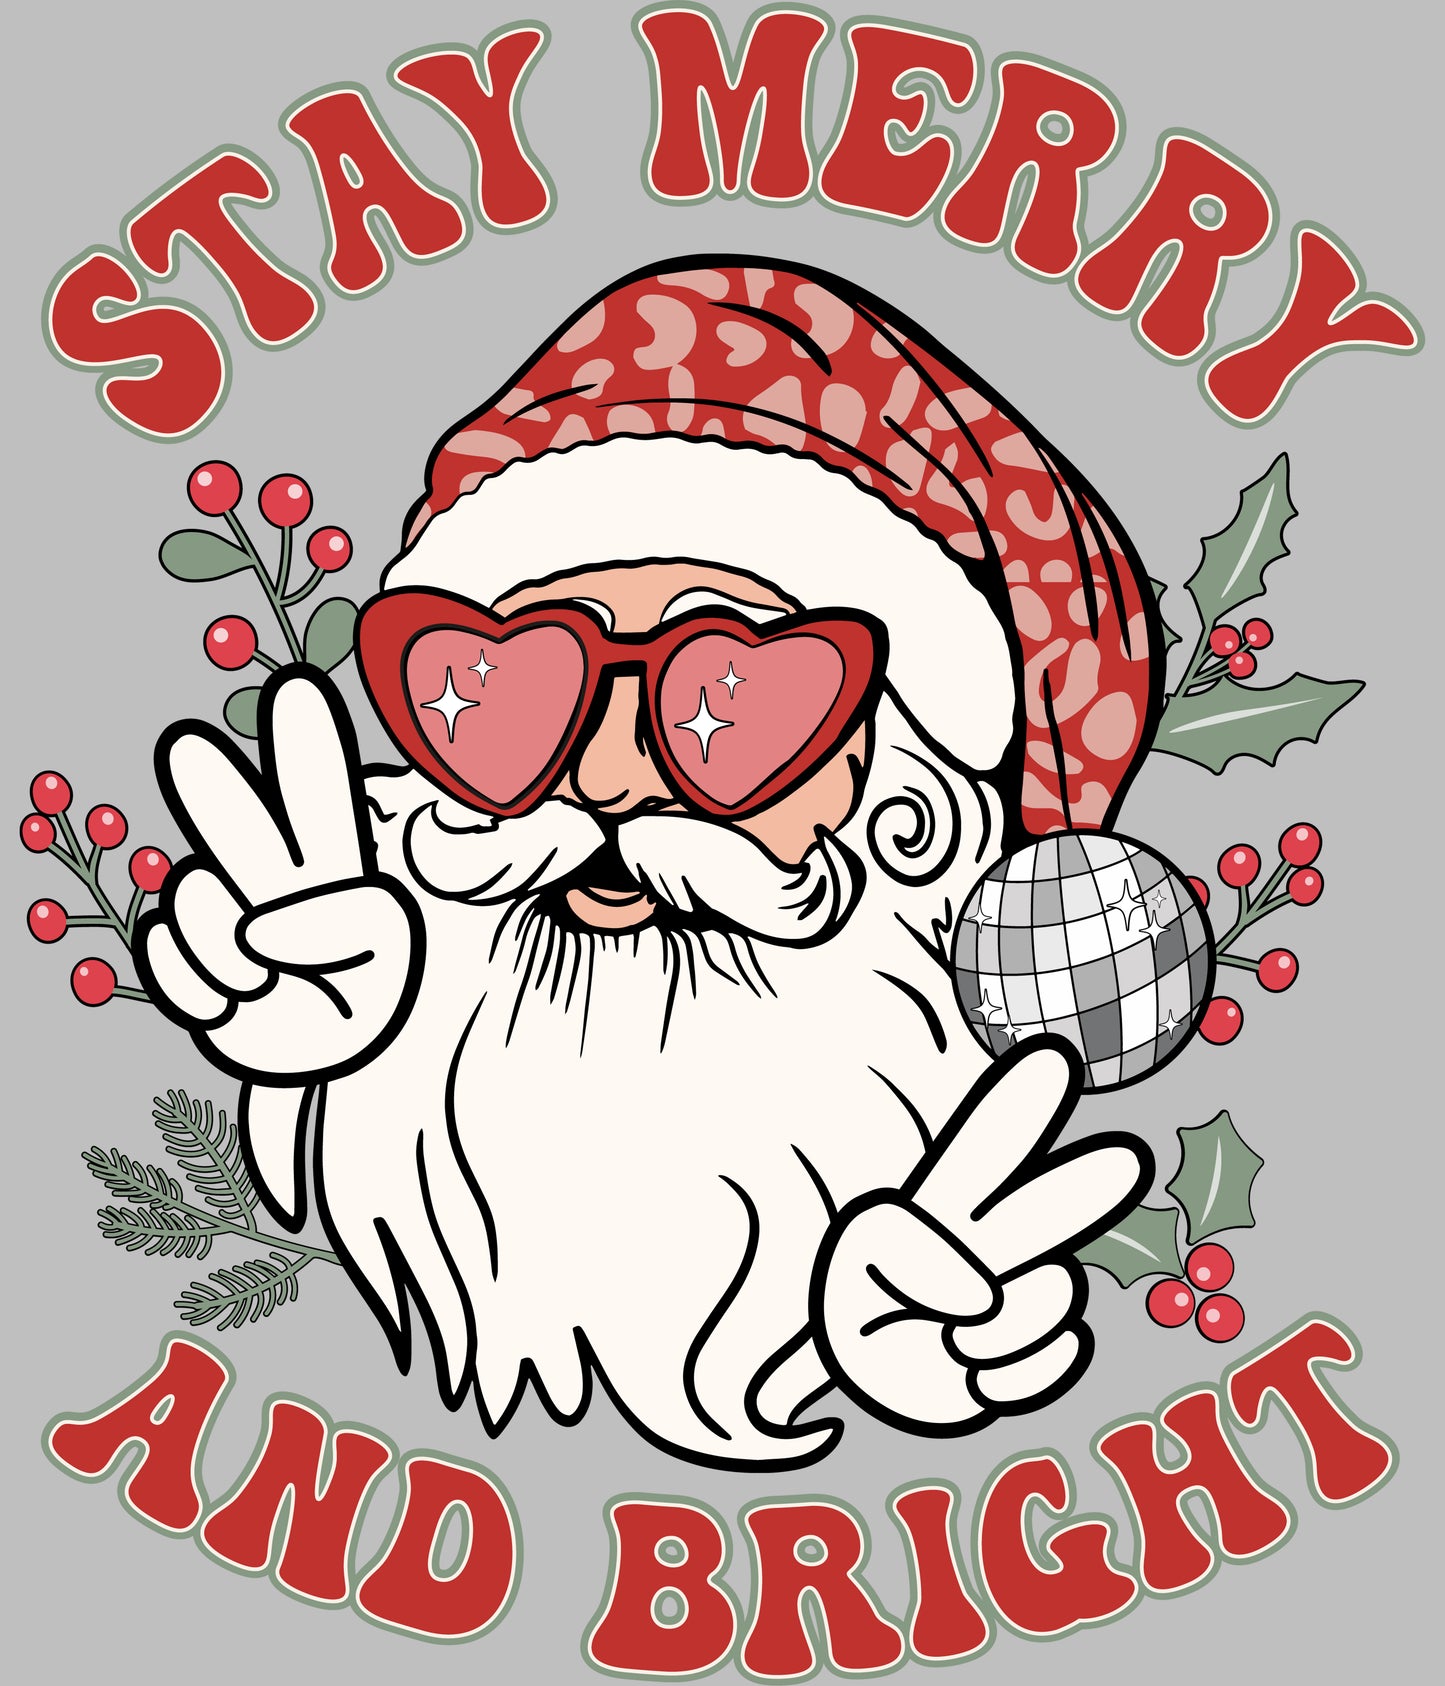 Stay Merry and Bright Santa